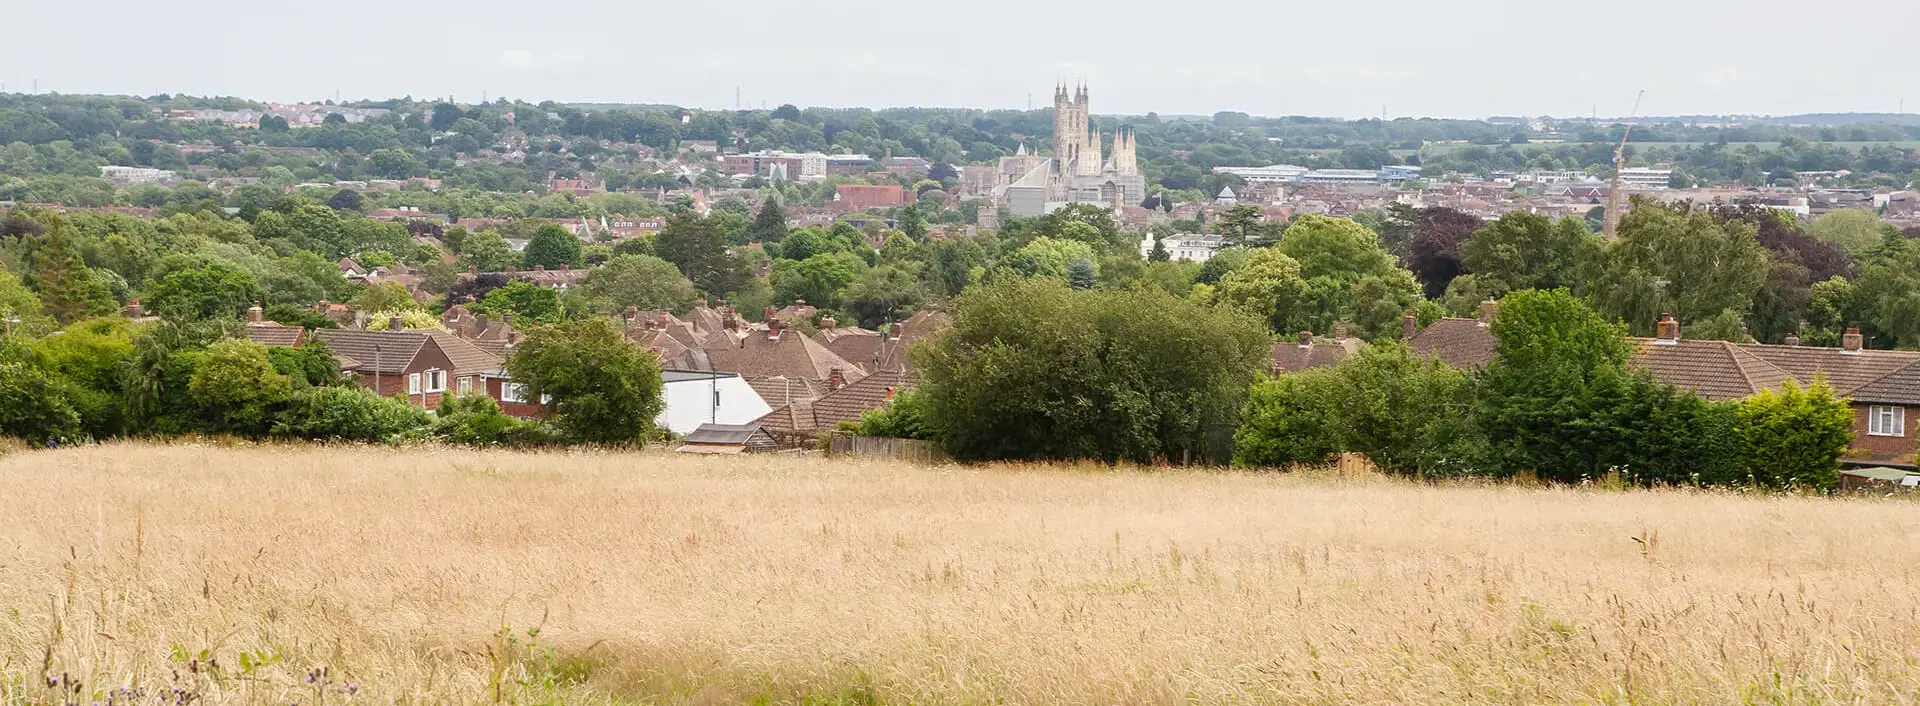 View across Canterbury, with Canterbury Cathedral in the distance